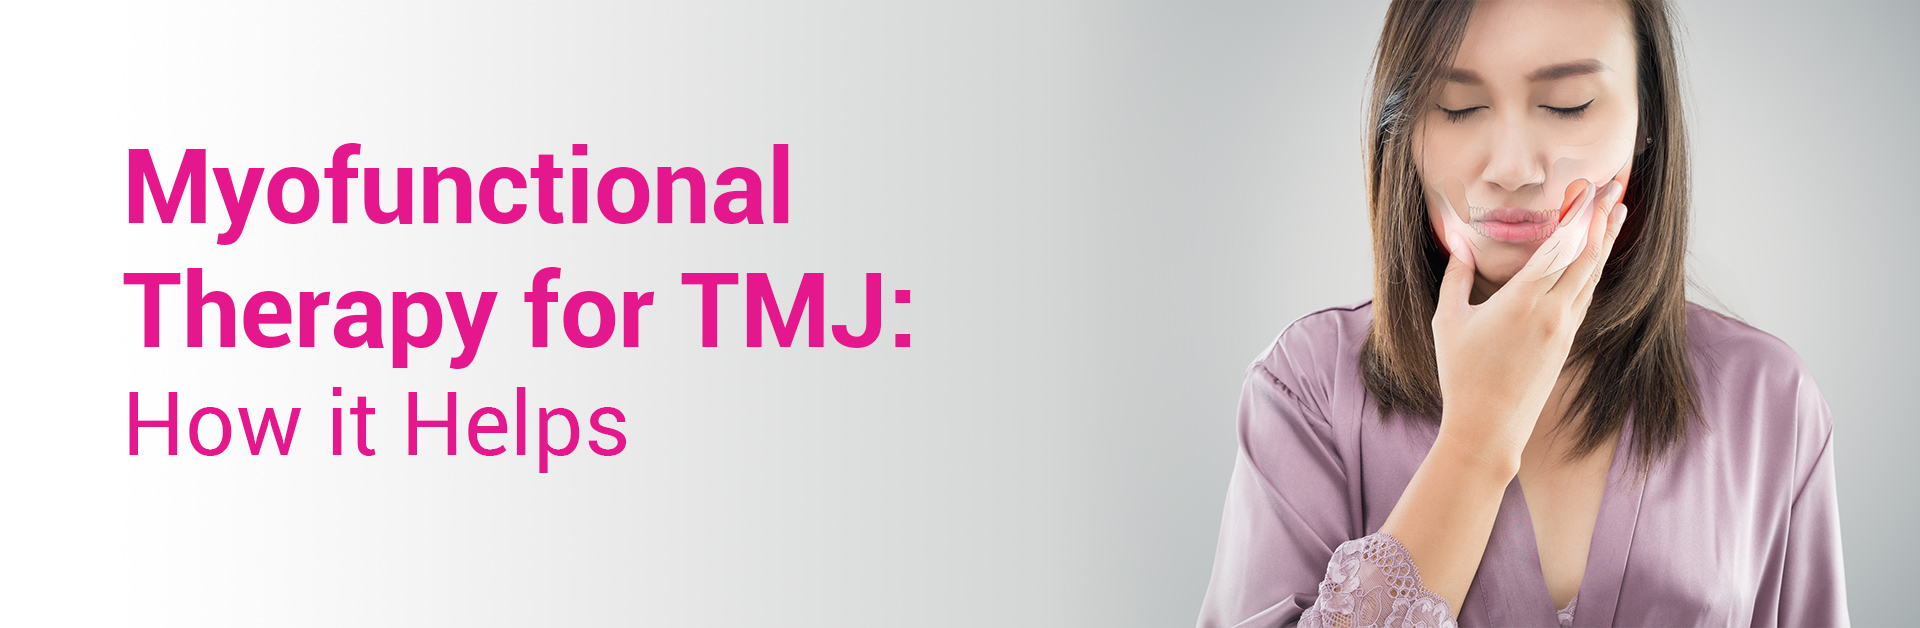 MYOFUNCTIONAL THERAPY FOR TMJ: HOW IT HELPS?